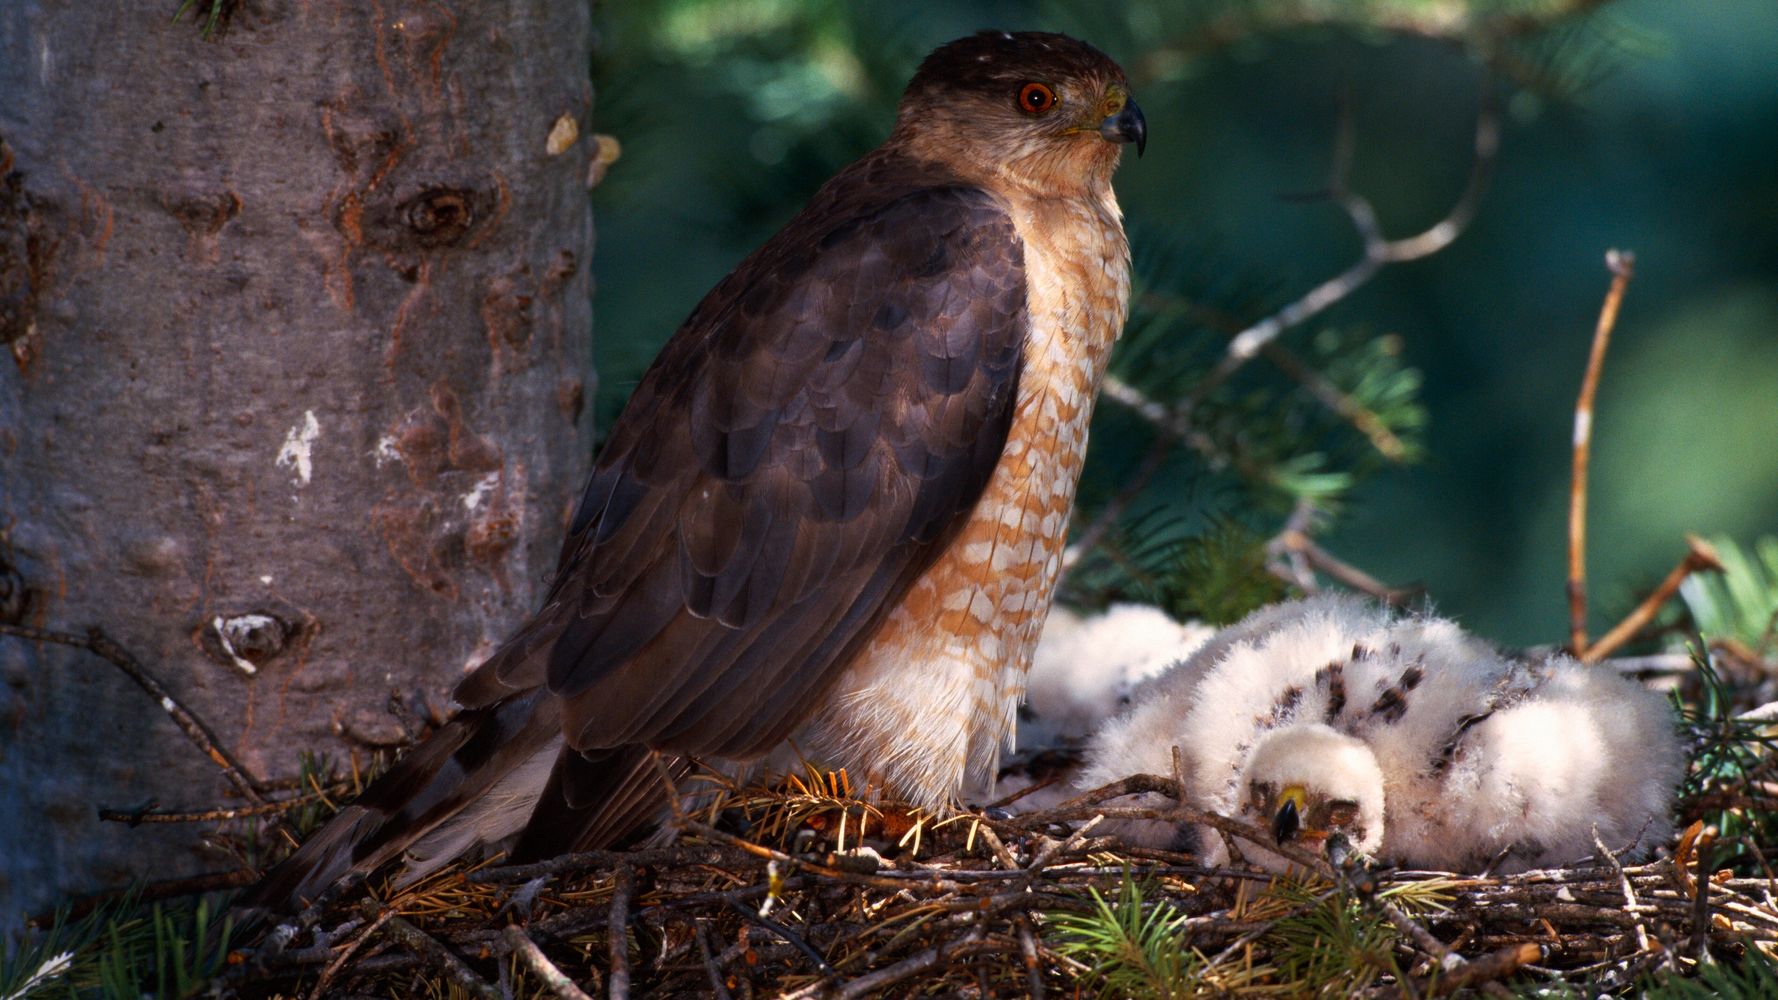 Pacific Northwest Heat Wave Made Baby Hawks Hurl Themselves Out Of Nests